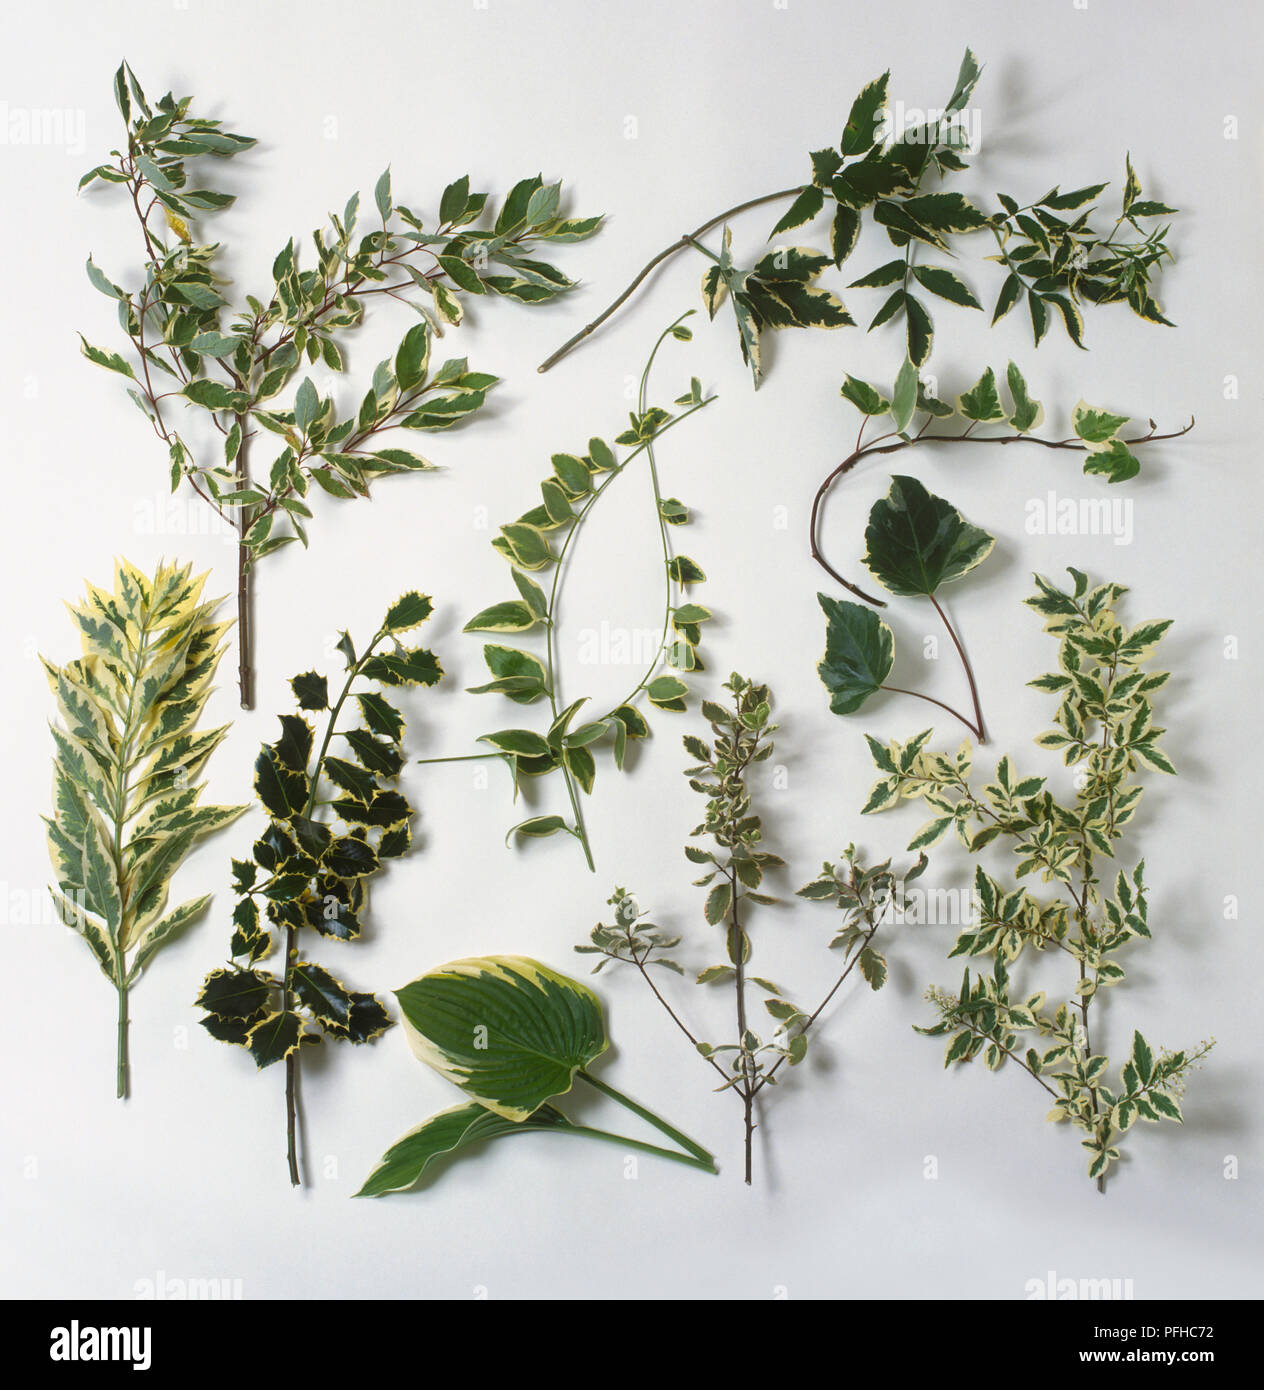 Selection of leafy green and variegated twigs, including Dogwood, Elder tree, Privet, Holly, Greater periwinkle, English ivy, Algerian ivy, Hosta, Pittosporum Stock Photo